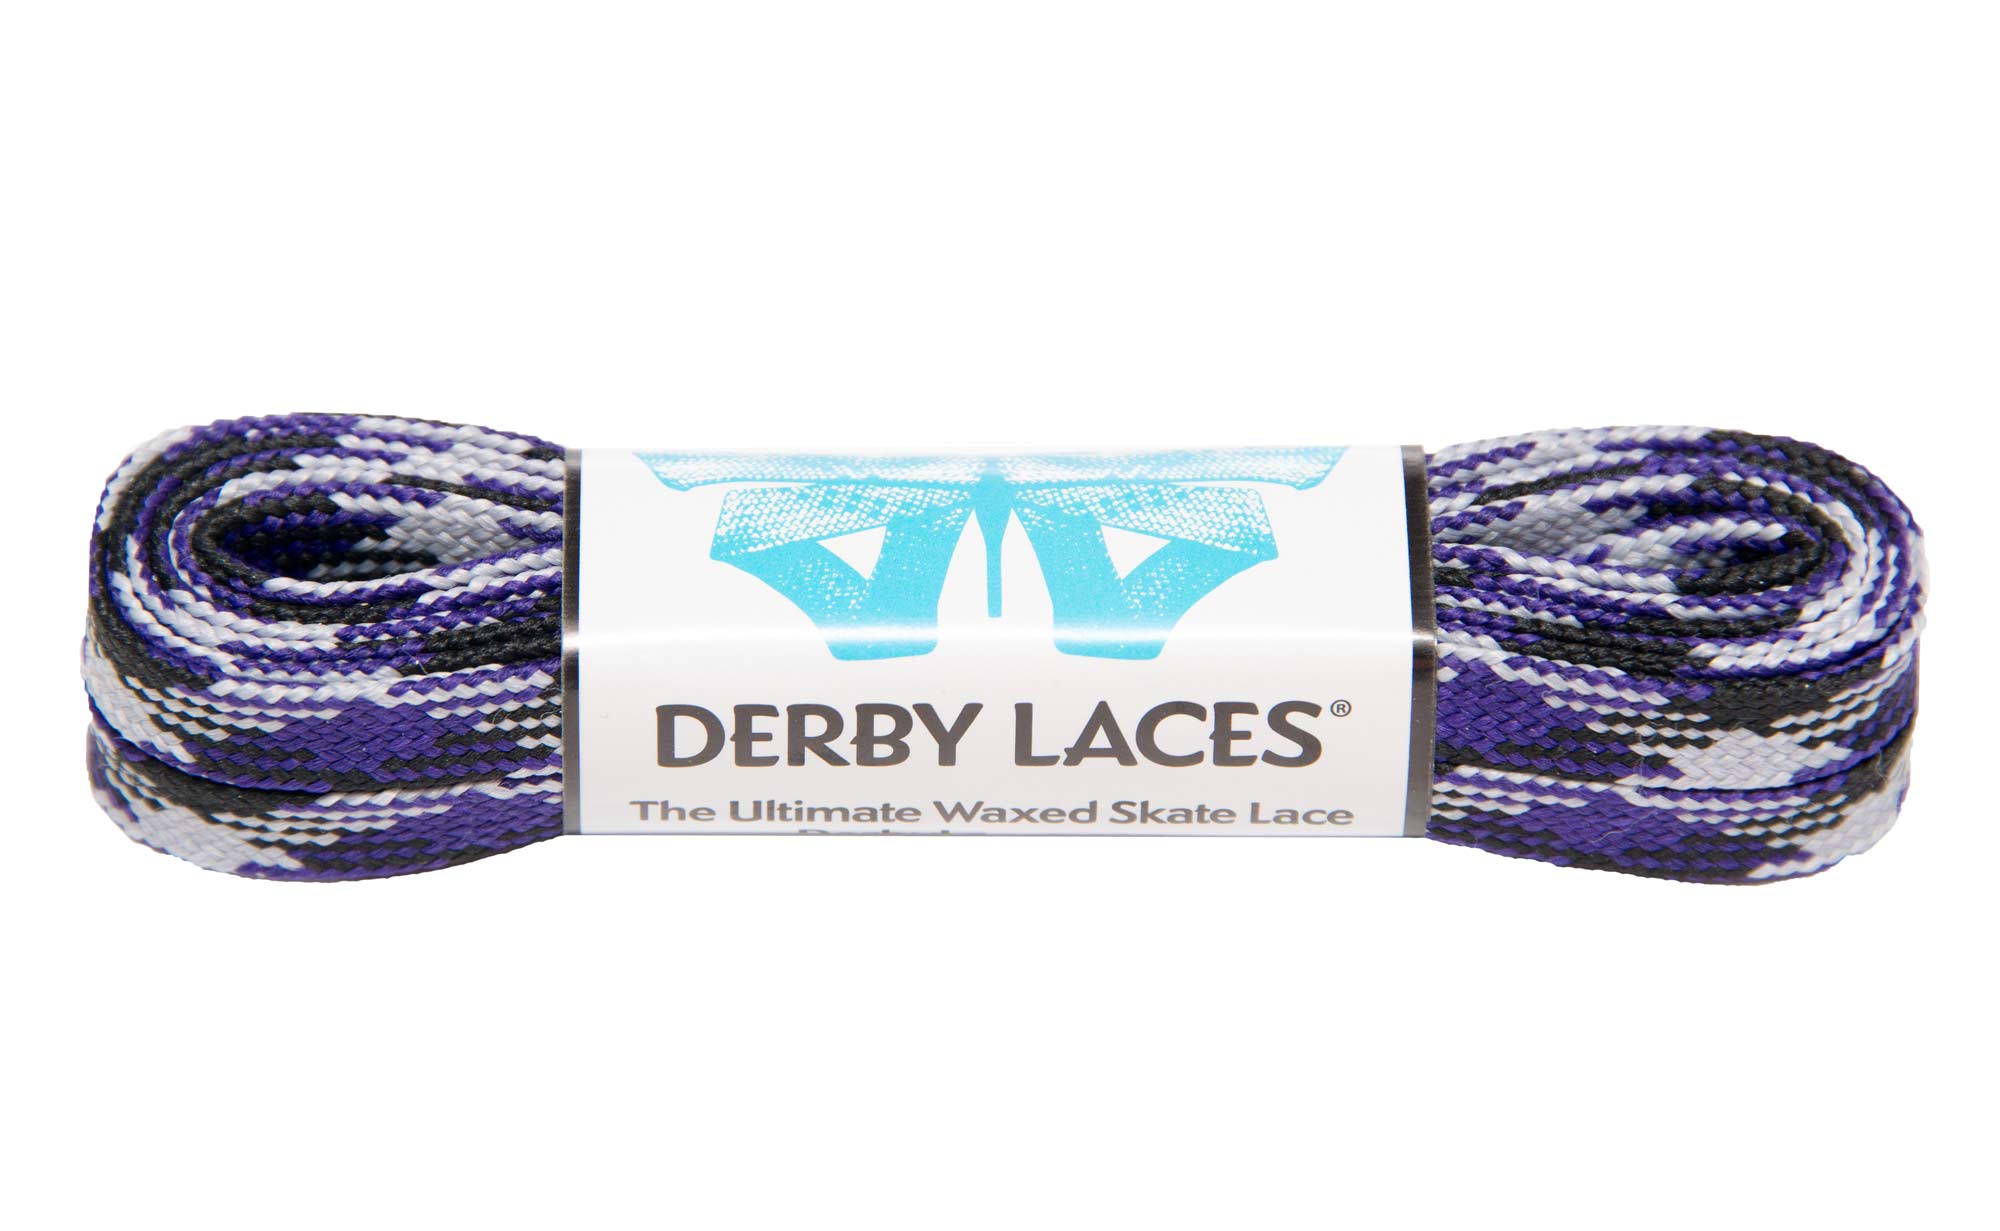 Roller Derby for Boots Derby Laces Purple Camouflage Flat Skates and Hockey Skates 10mm Wide